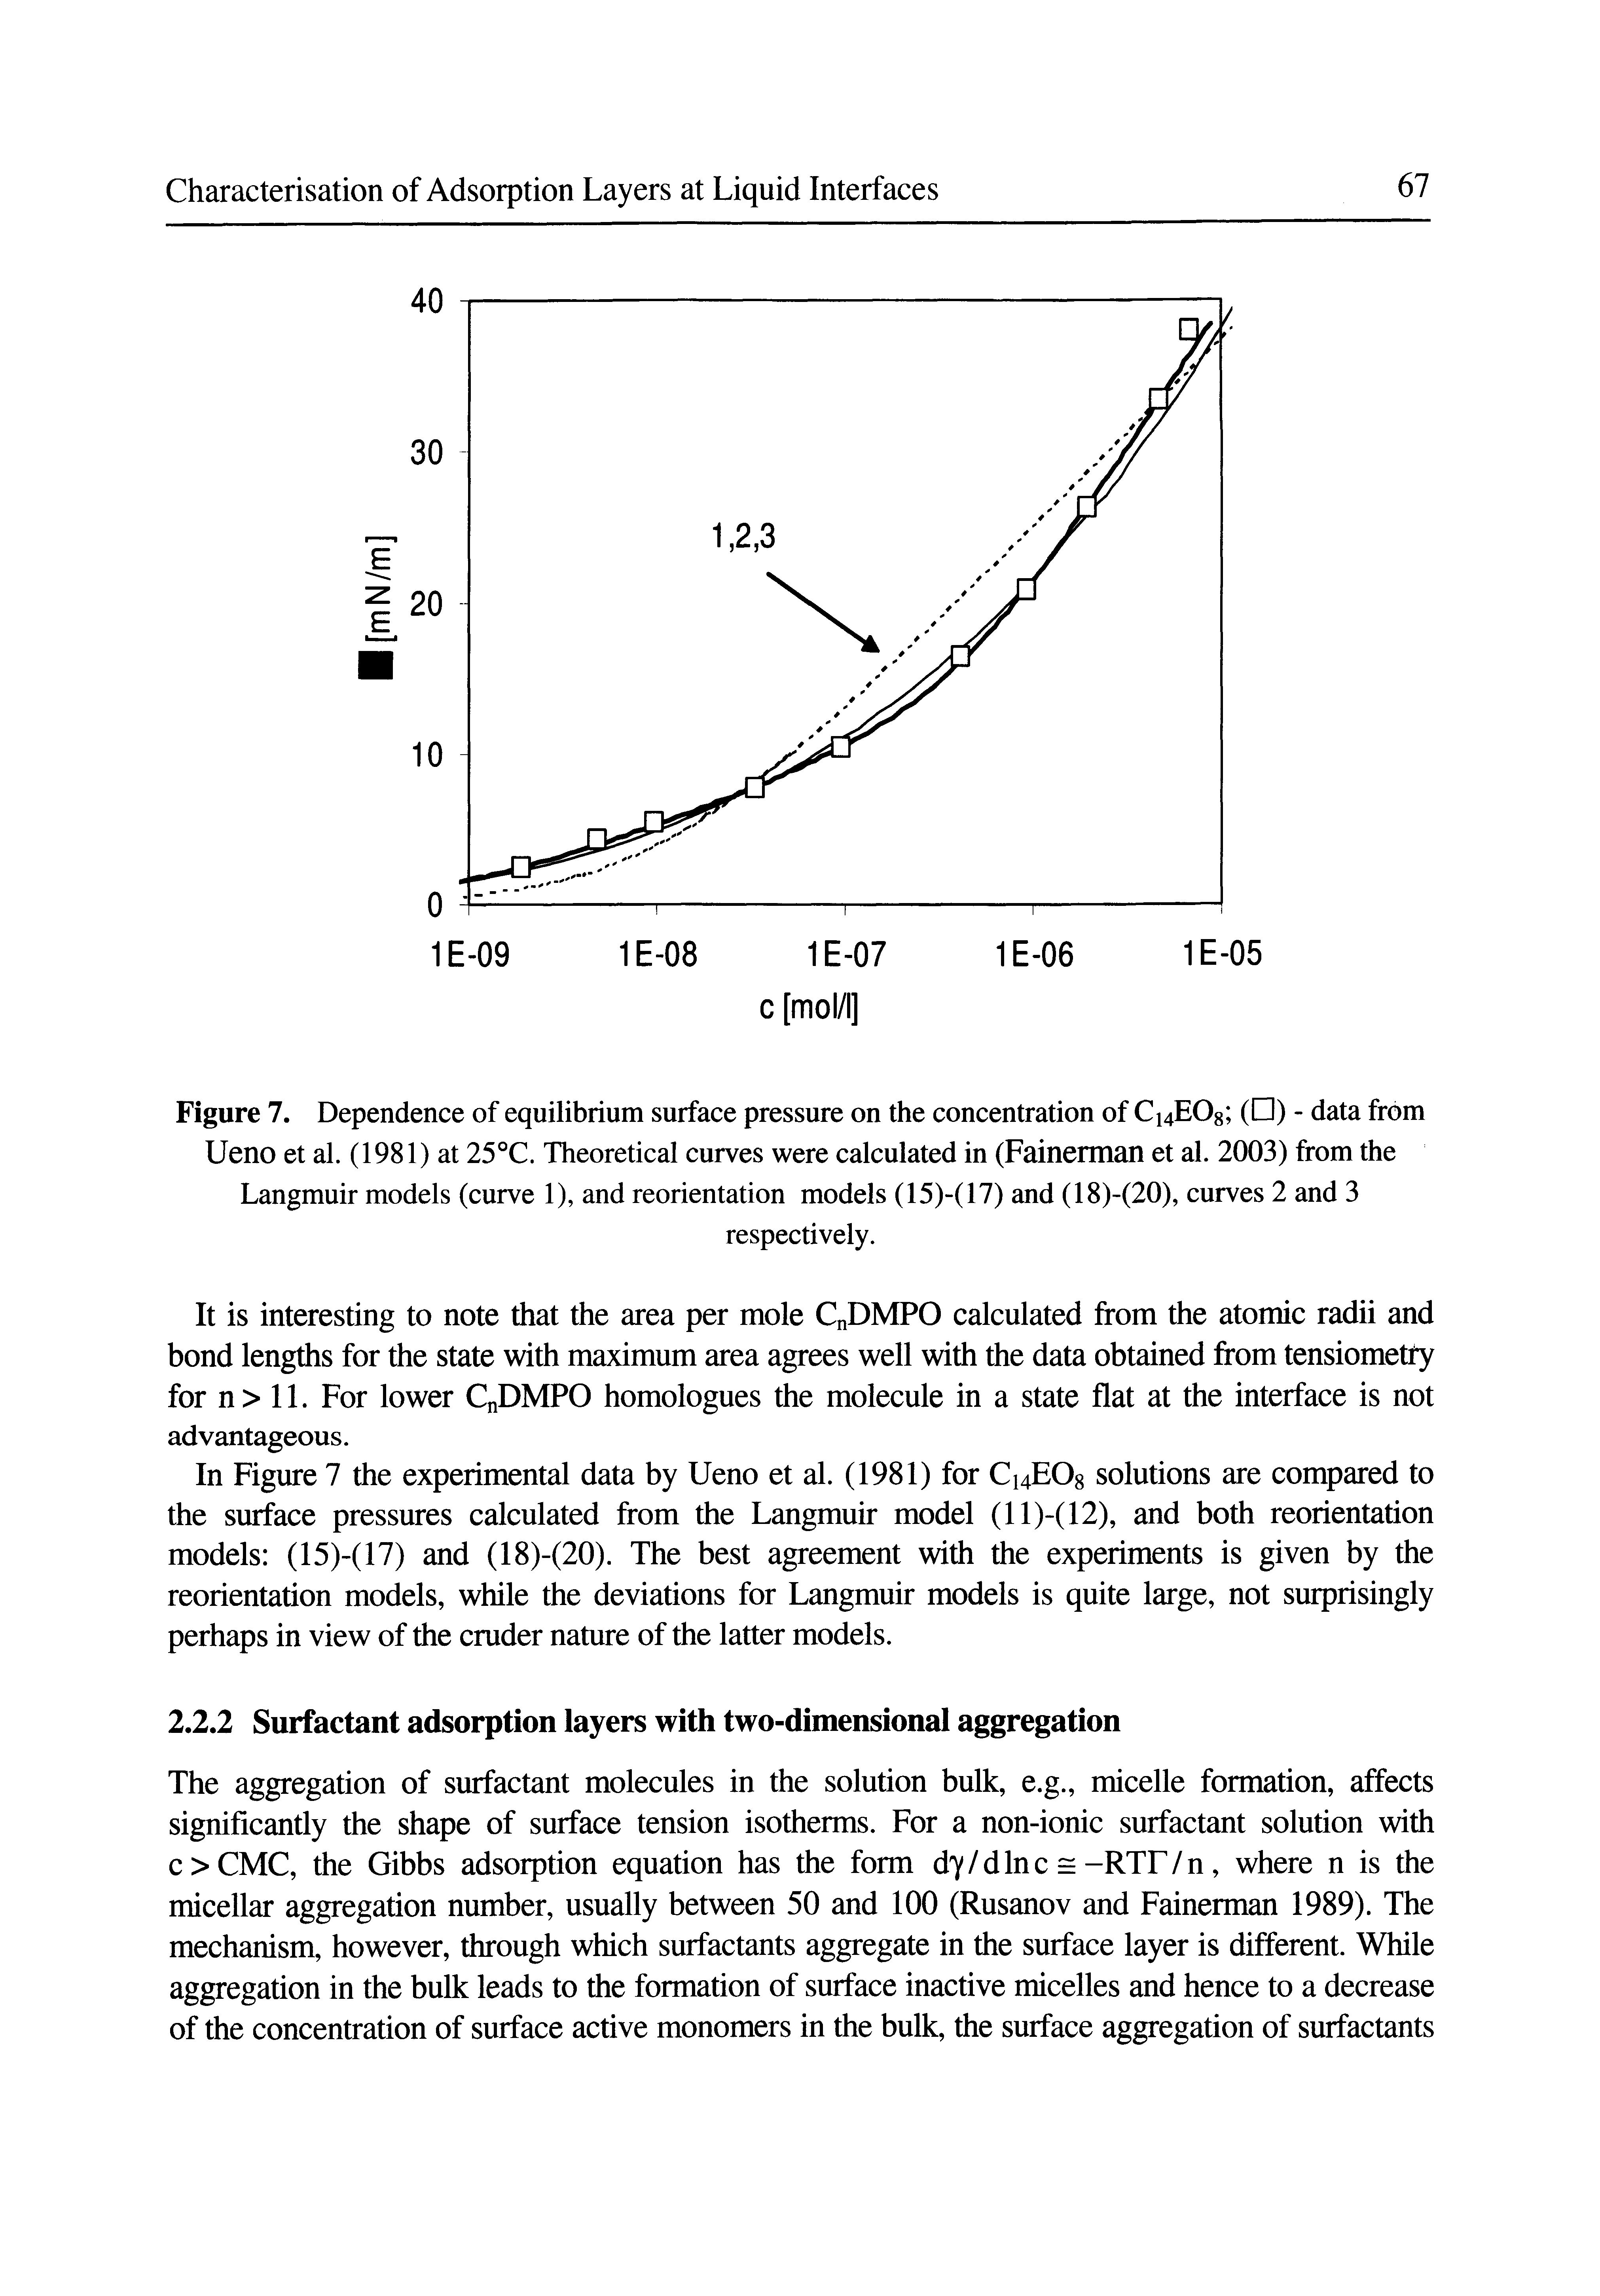 Figure 7. Dependence of equilibrium surface pressure on the concentration of C EOs ( ) - data from Ueno et al. (1981) at 25°C. Theoretical curves were calculated in (Fainerman et al. 2003) from the Langmuir models (curve 1), and reorientation models (15)-(17) and (18)-(20), curves 2 and 3...